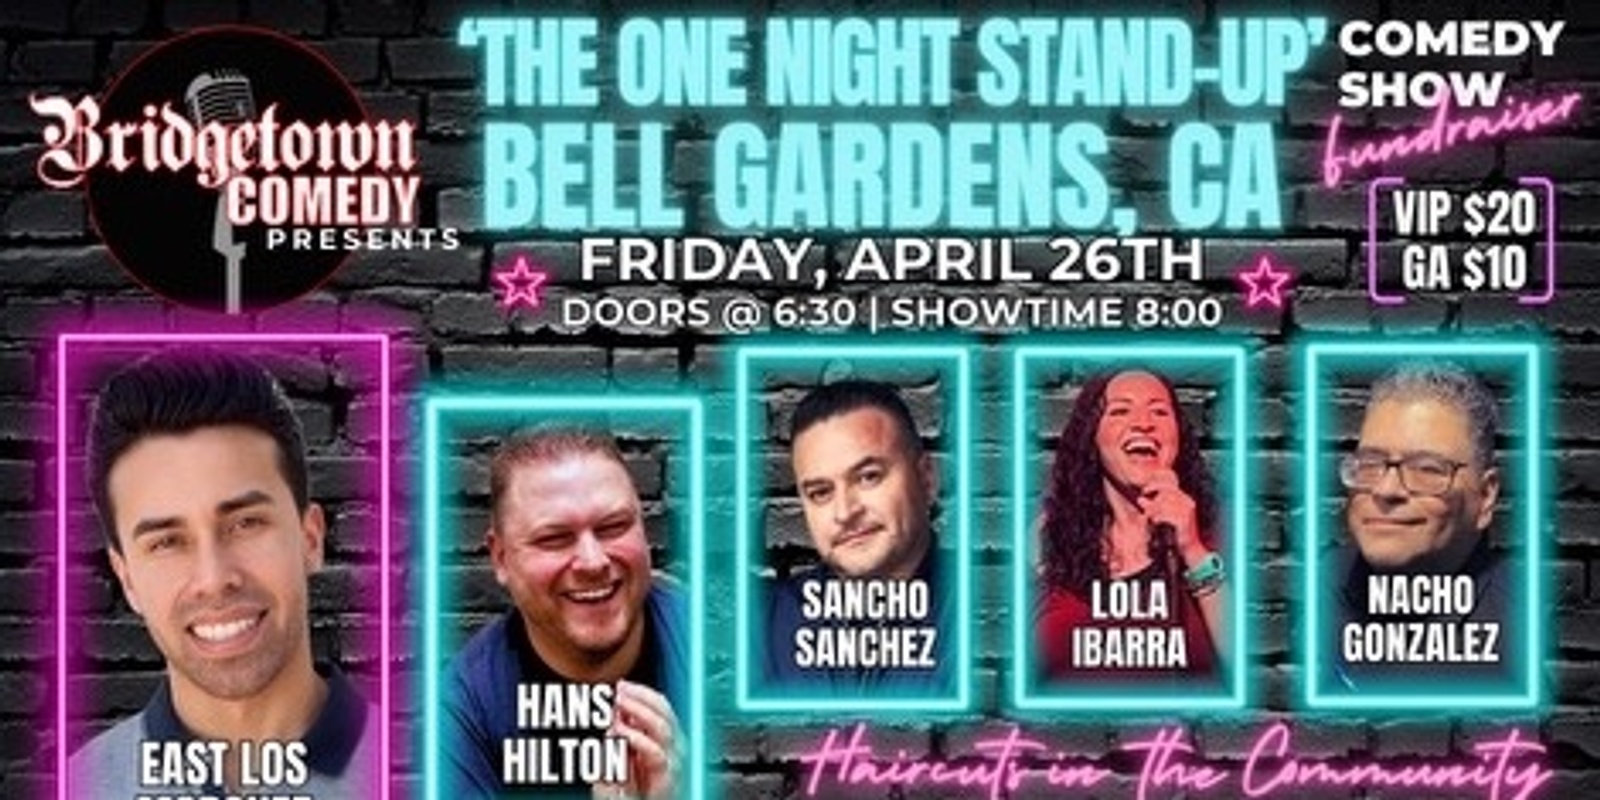 Banner image for The One Night Stand-Up in Bell Gardens presented by Bridgetown Comedy